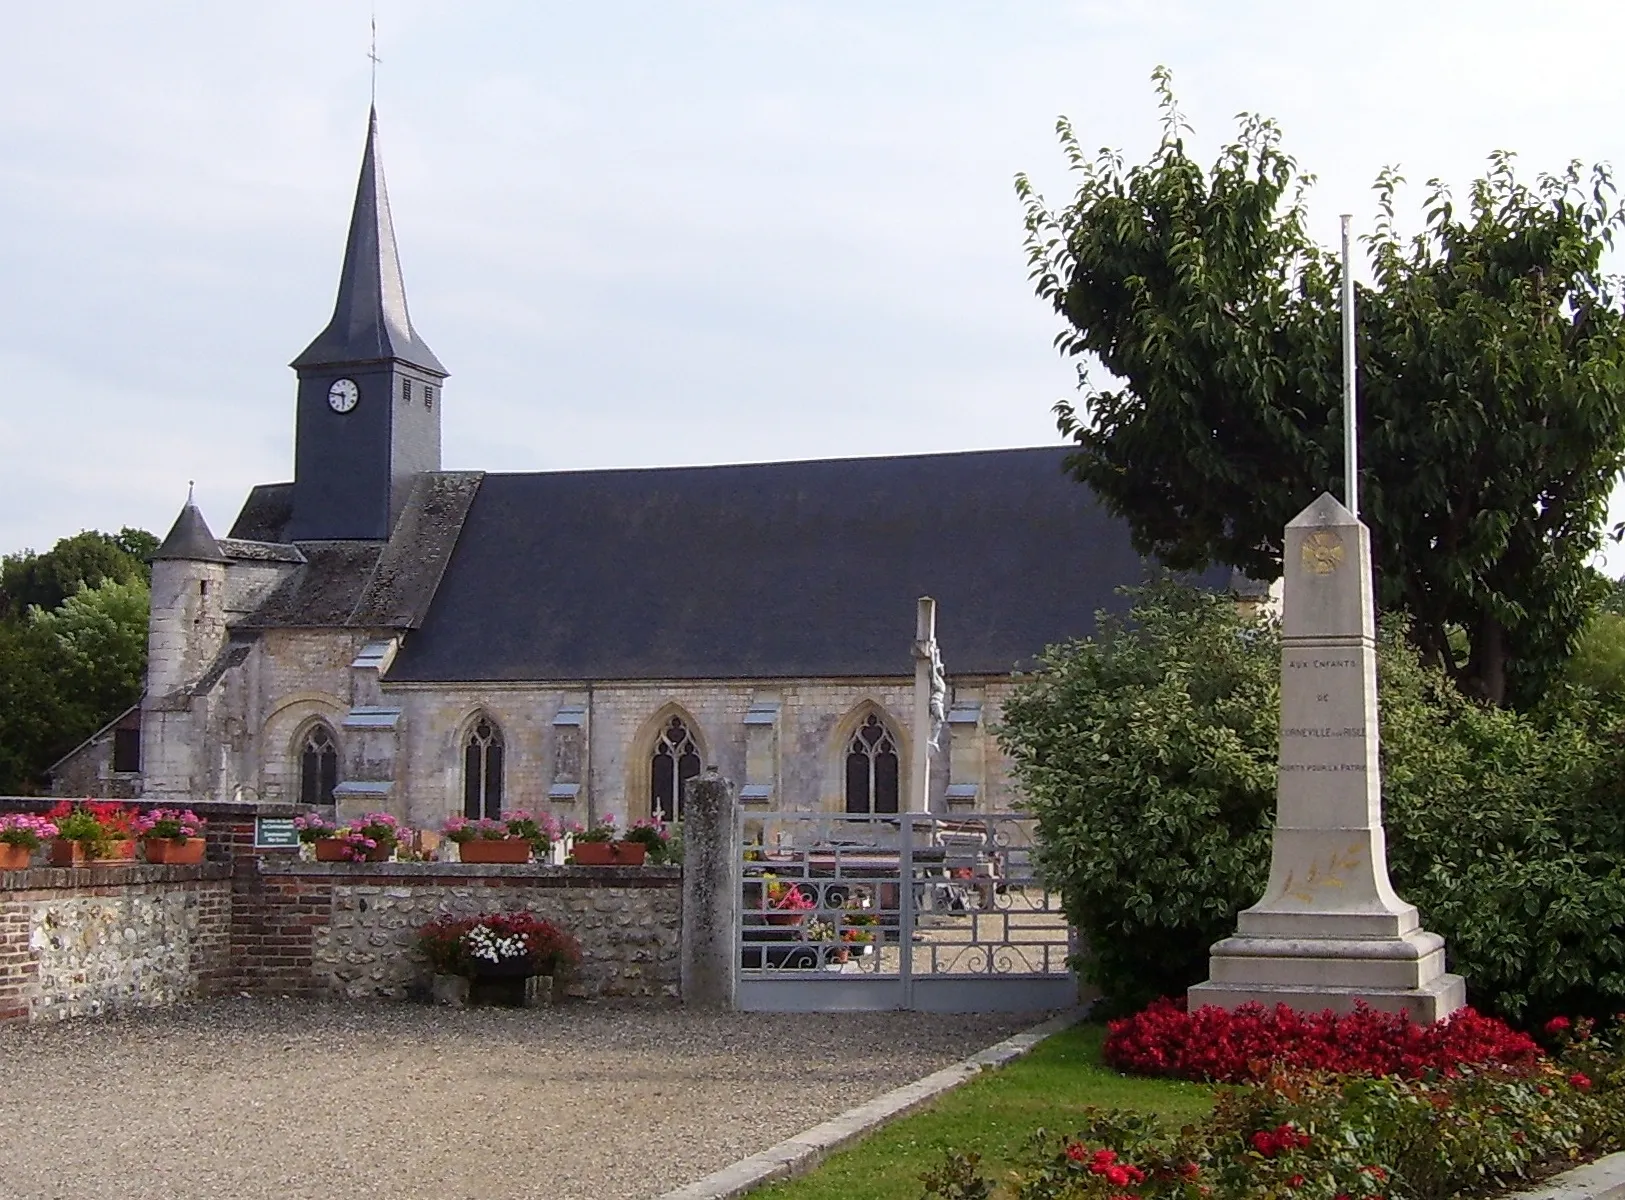 Photo showing: Abbeychurch Notre-Dame in Corneville-sur-Risle, departement Eure, Normandie, France. It was built in the 12th century. And the war memorial of the town.